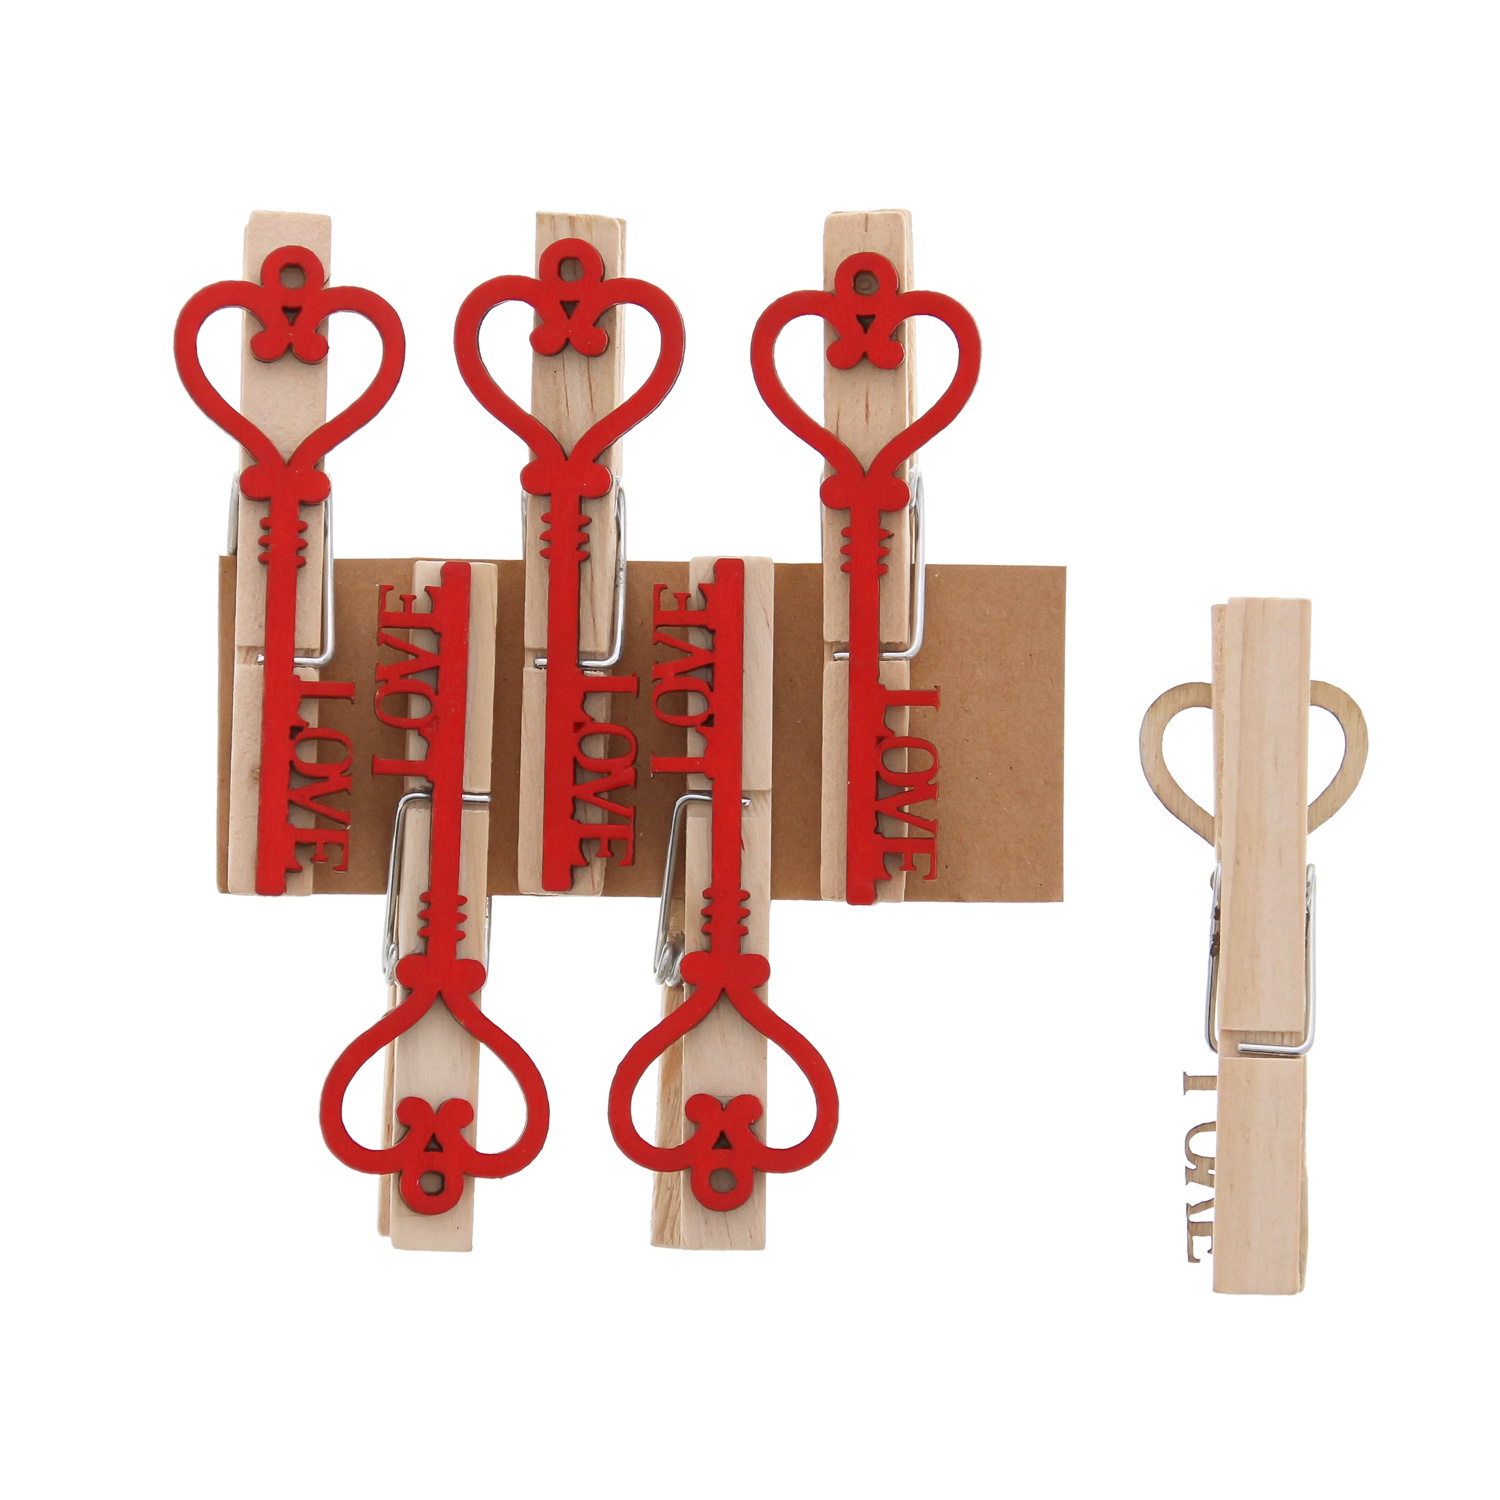 "Love" Key peg (red) - 36 pieces